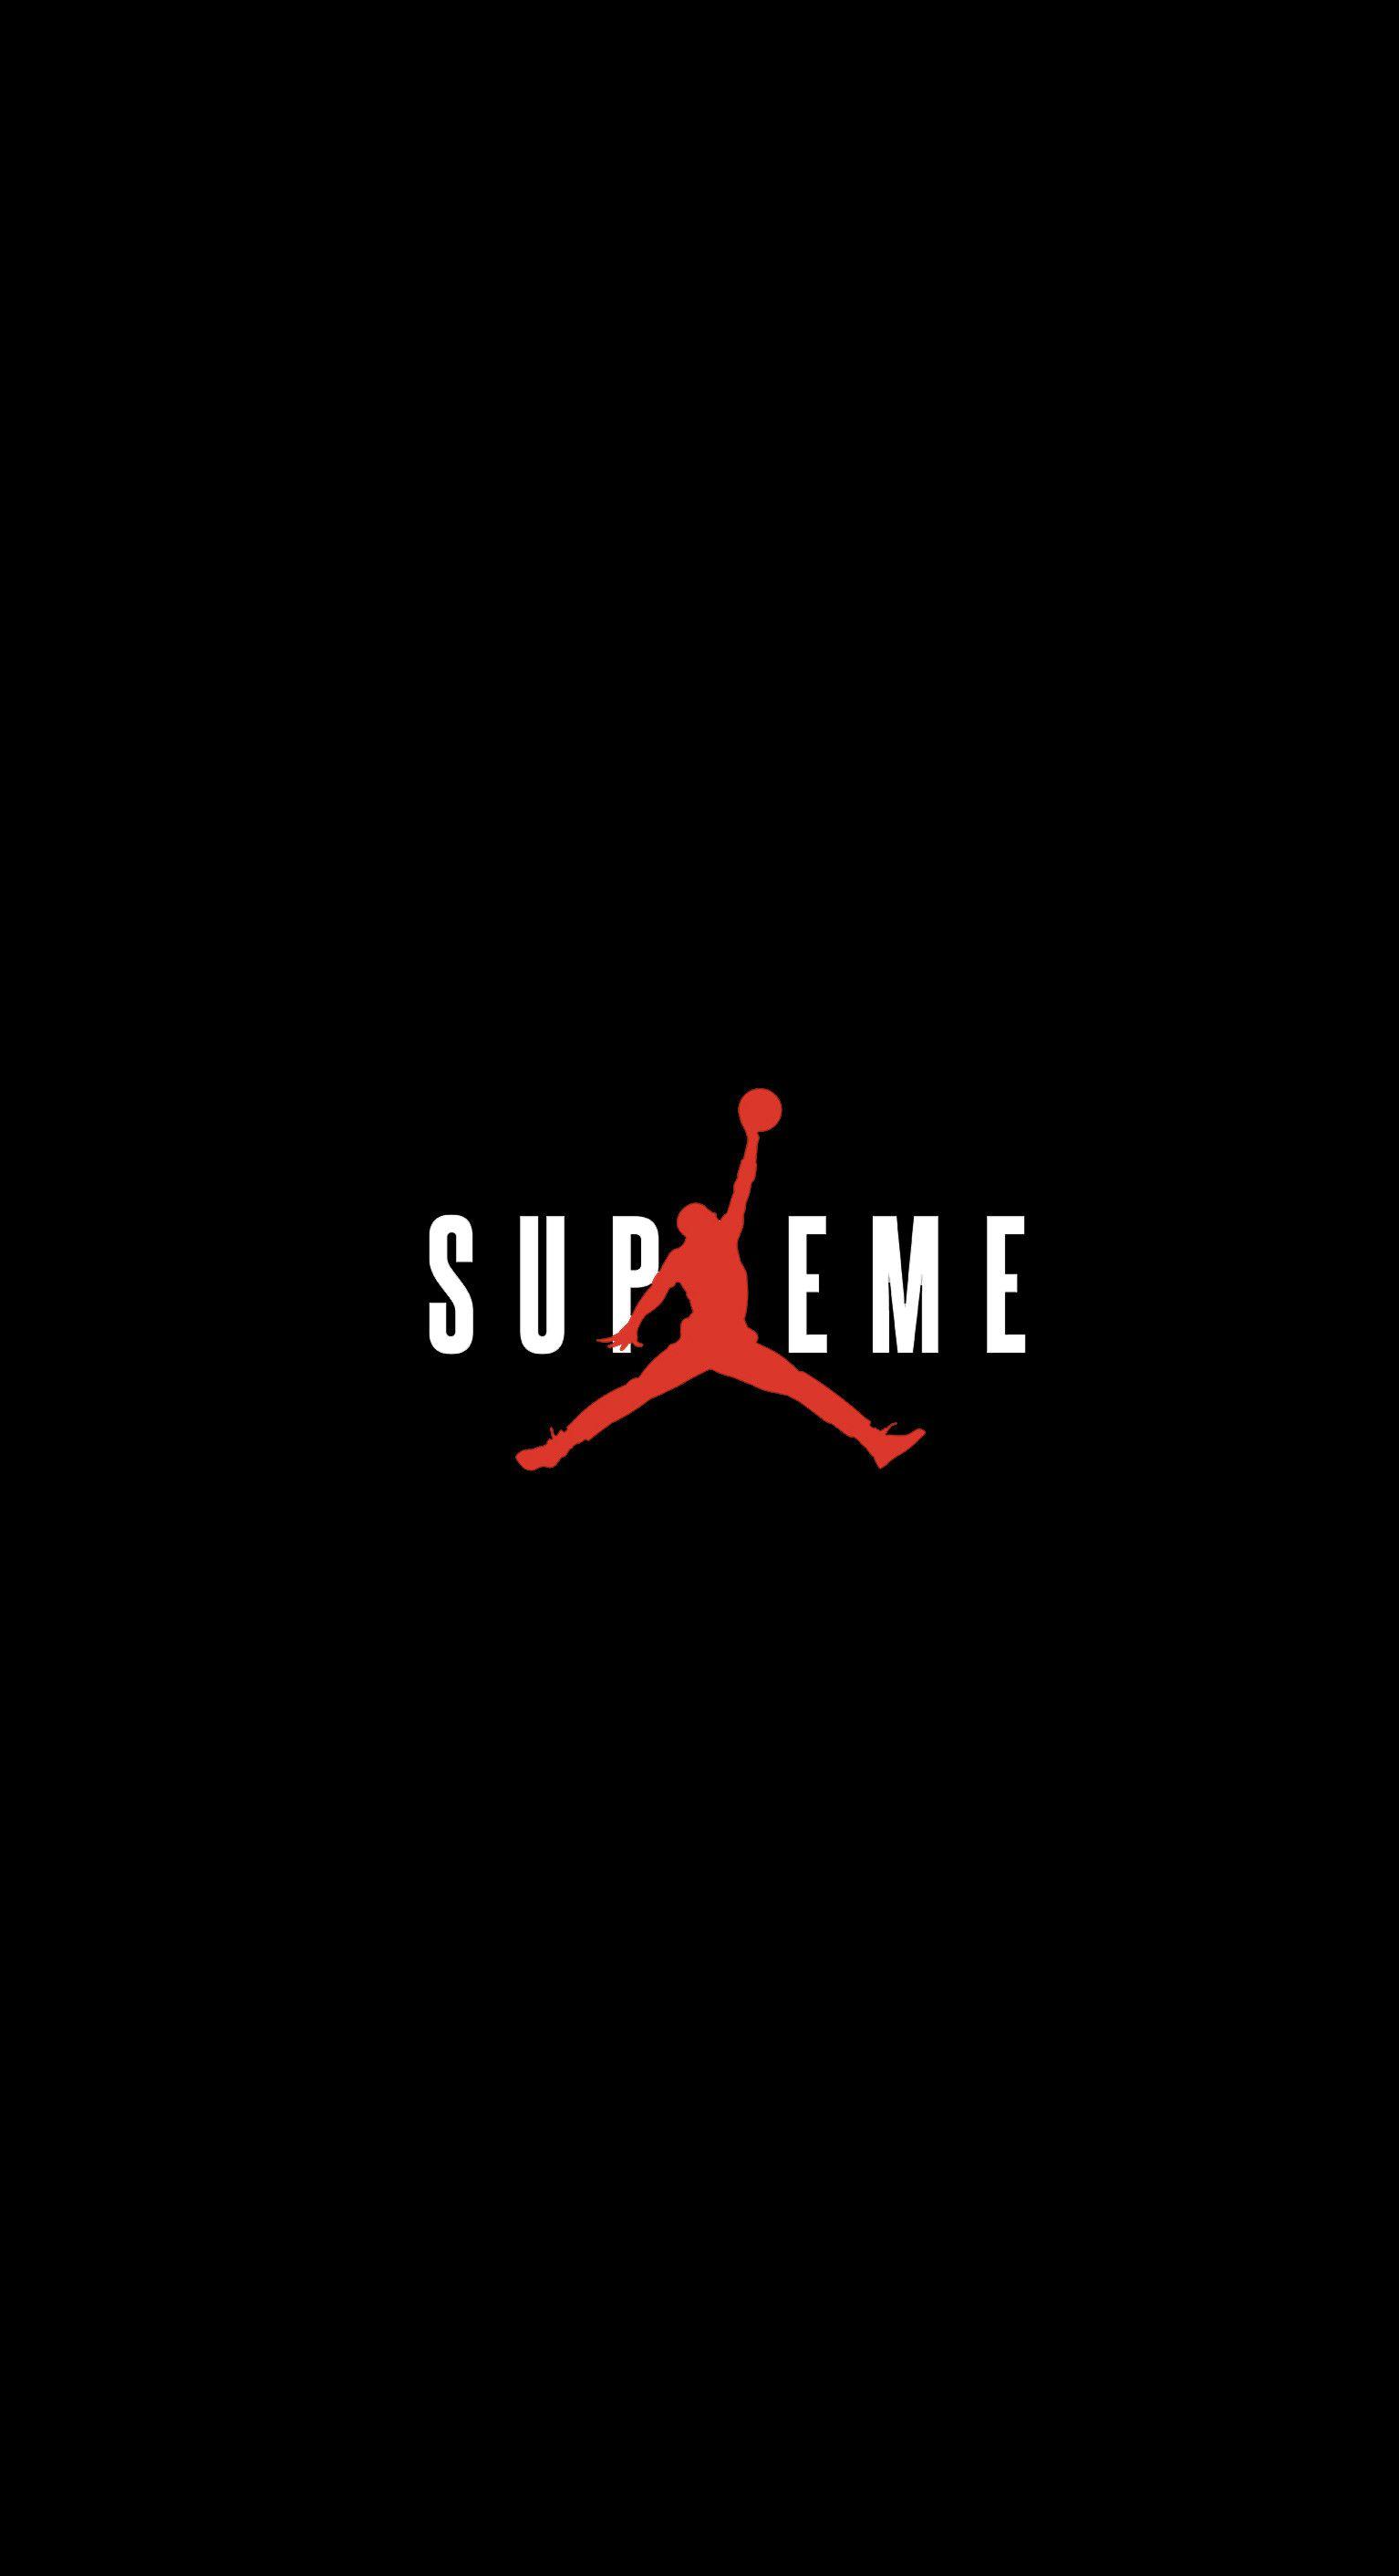 Supreme Iphone 6 Wallpapers Top Free Supreme Iphone 6 Backgrounds Wallpaperaccess